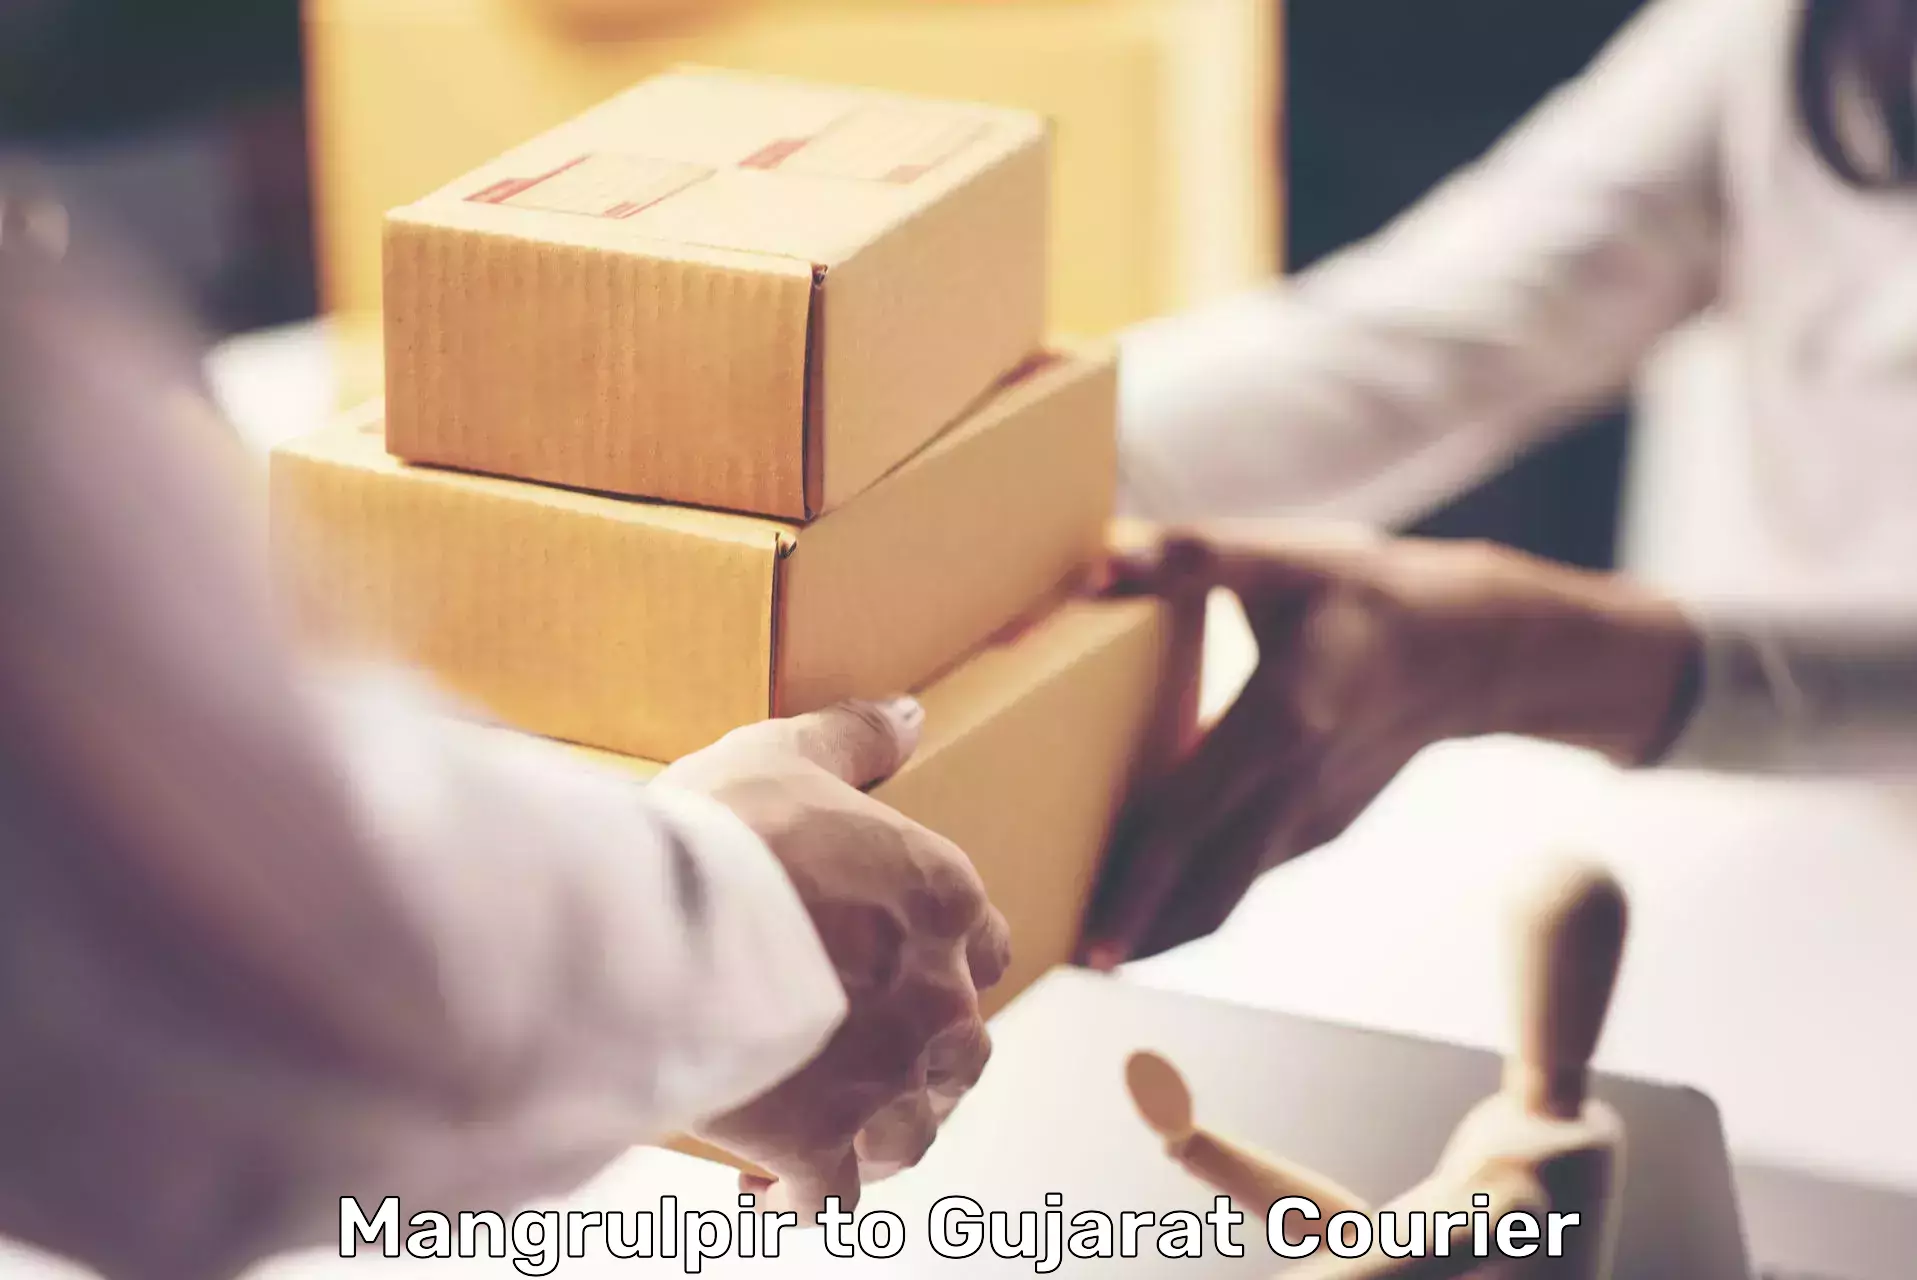 Quality courier partnerships Mangrulpir to Anand